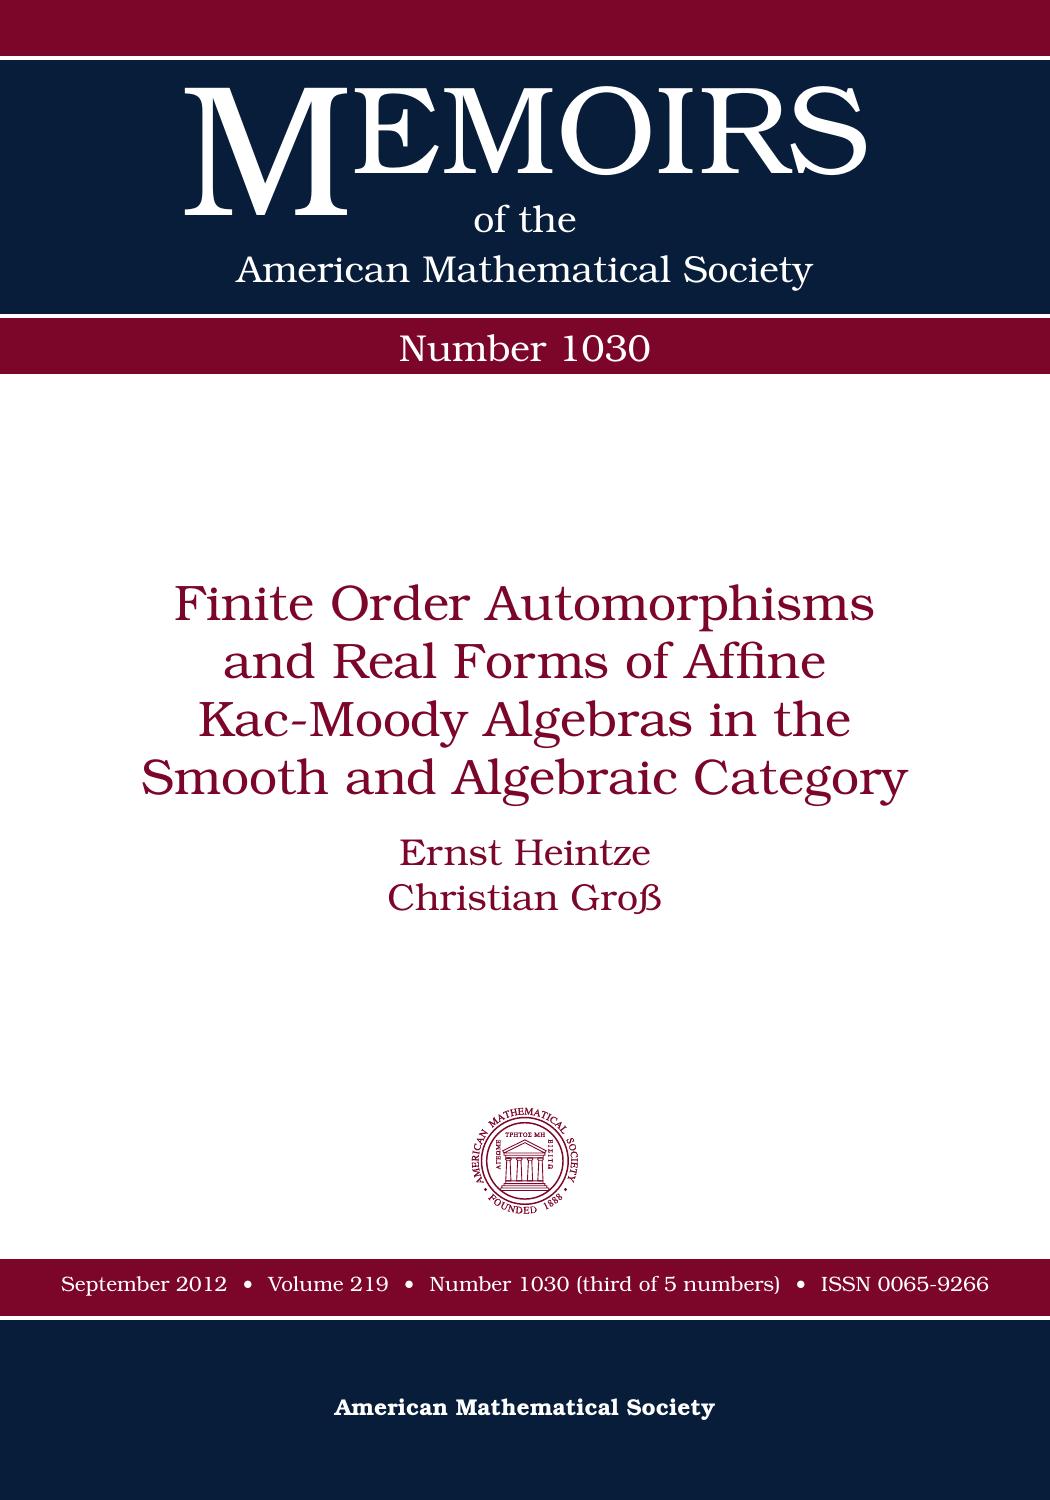 Finite Order Automorphisms and Real Forms of Affine Kac-Moody Algebras in the Smooth and Algebraic Category